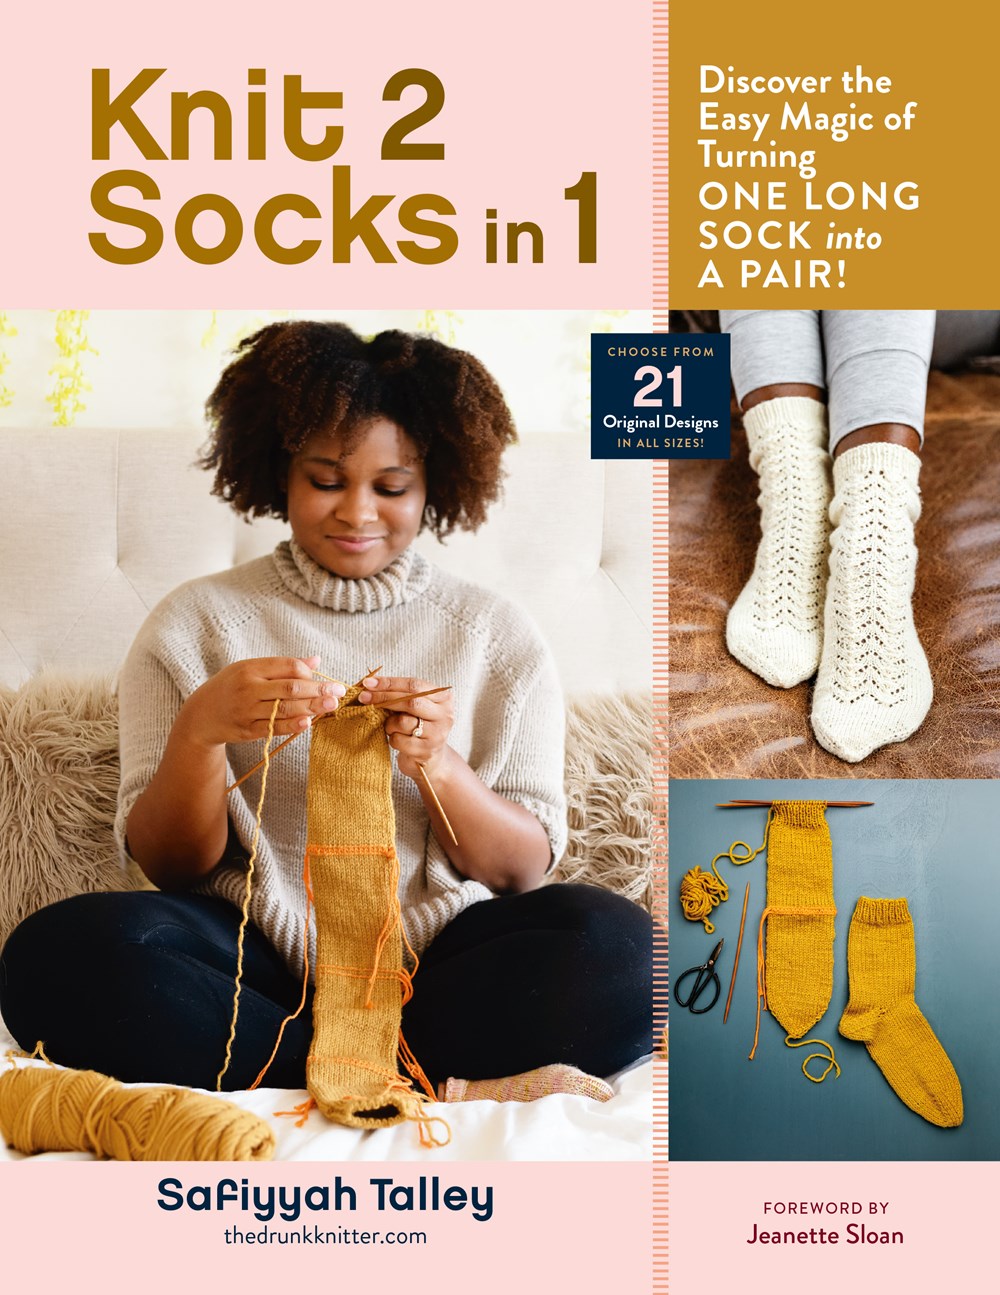 Knit 2 Socks in 1: Discover the Easy Magic of Turning One Long Sock into a Pair!